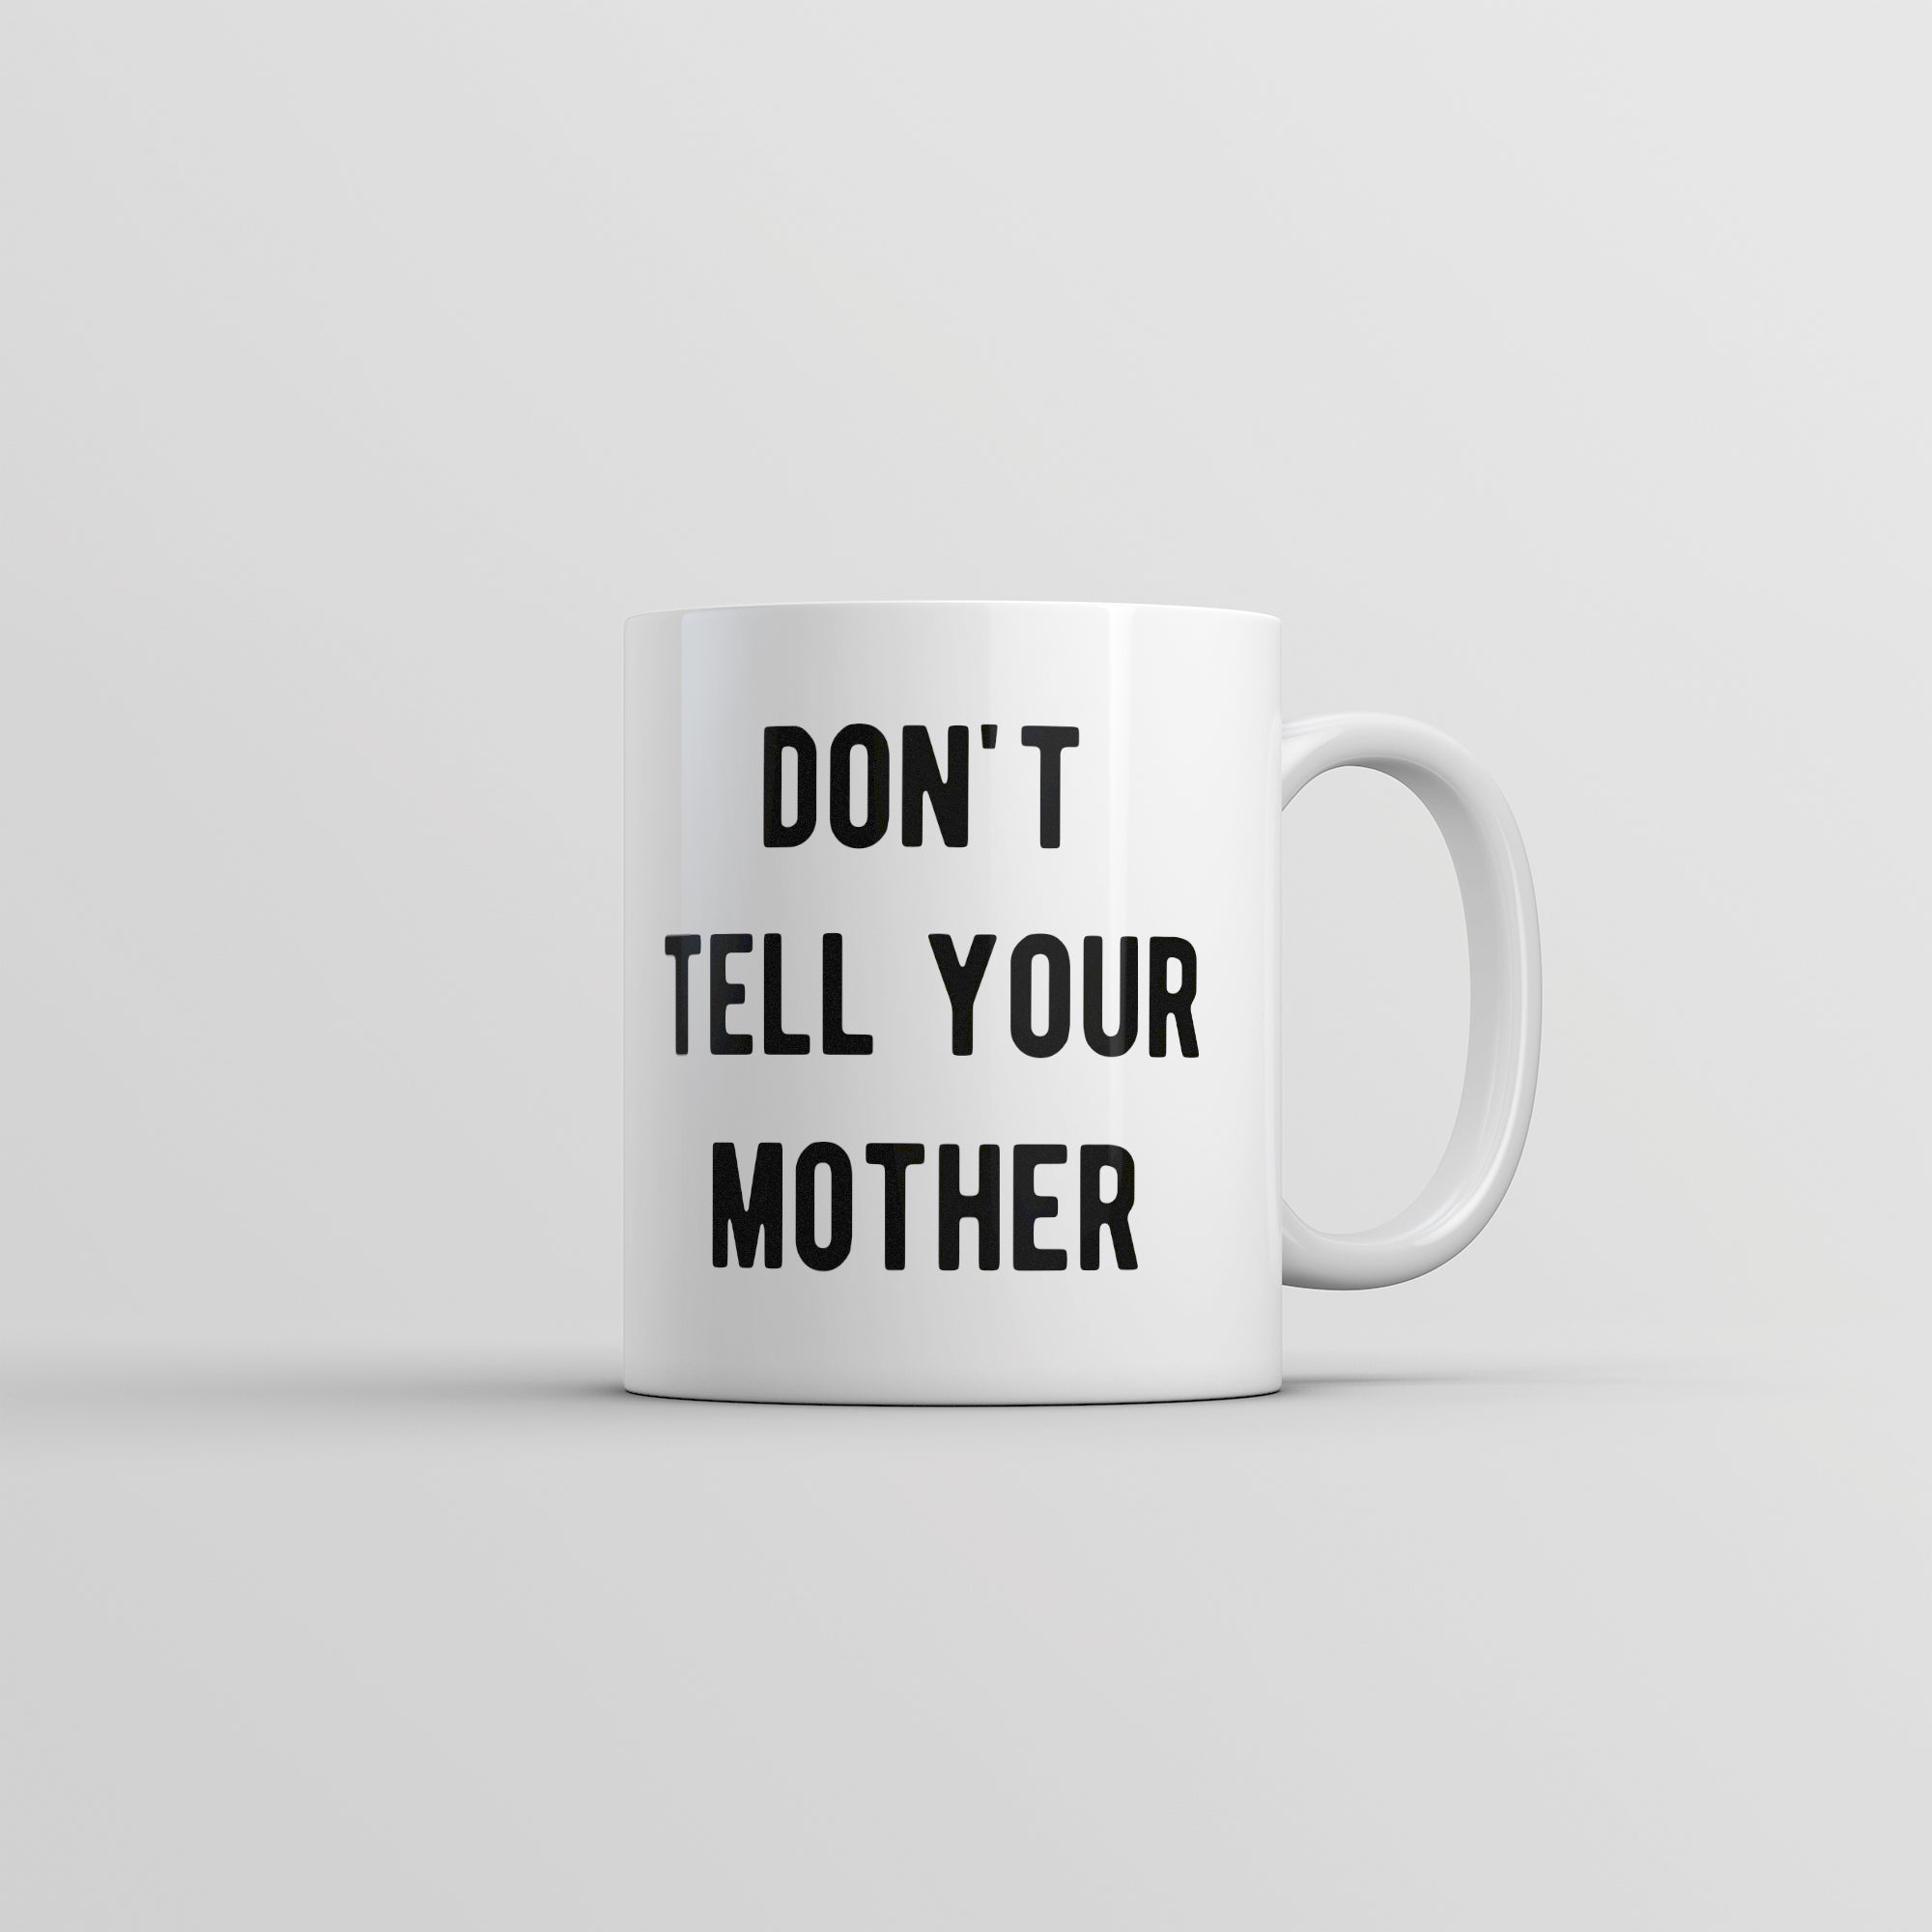 Funny White Dont Tell Your Mother Coffee Mug Nerdy Sarcastic Tee